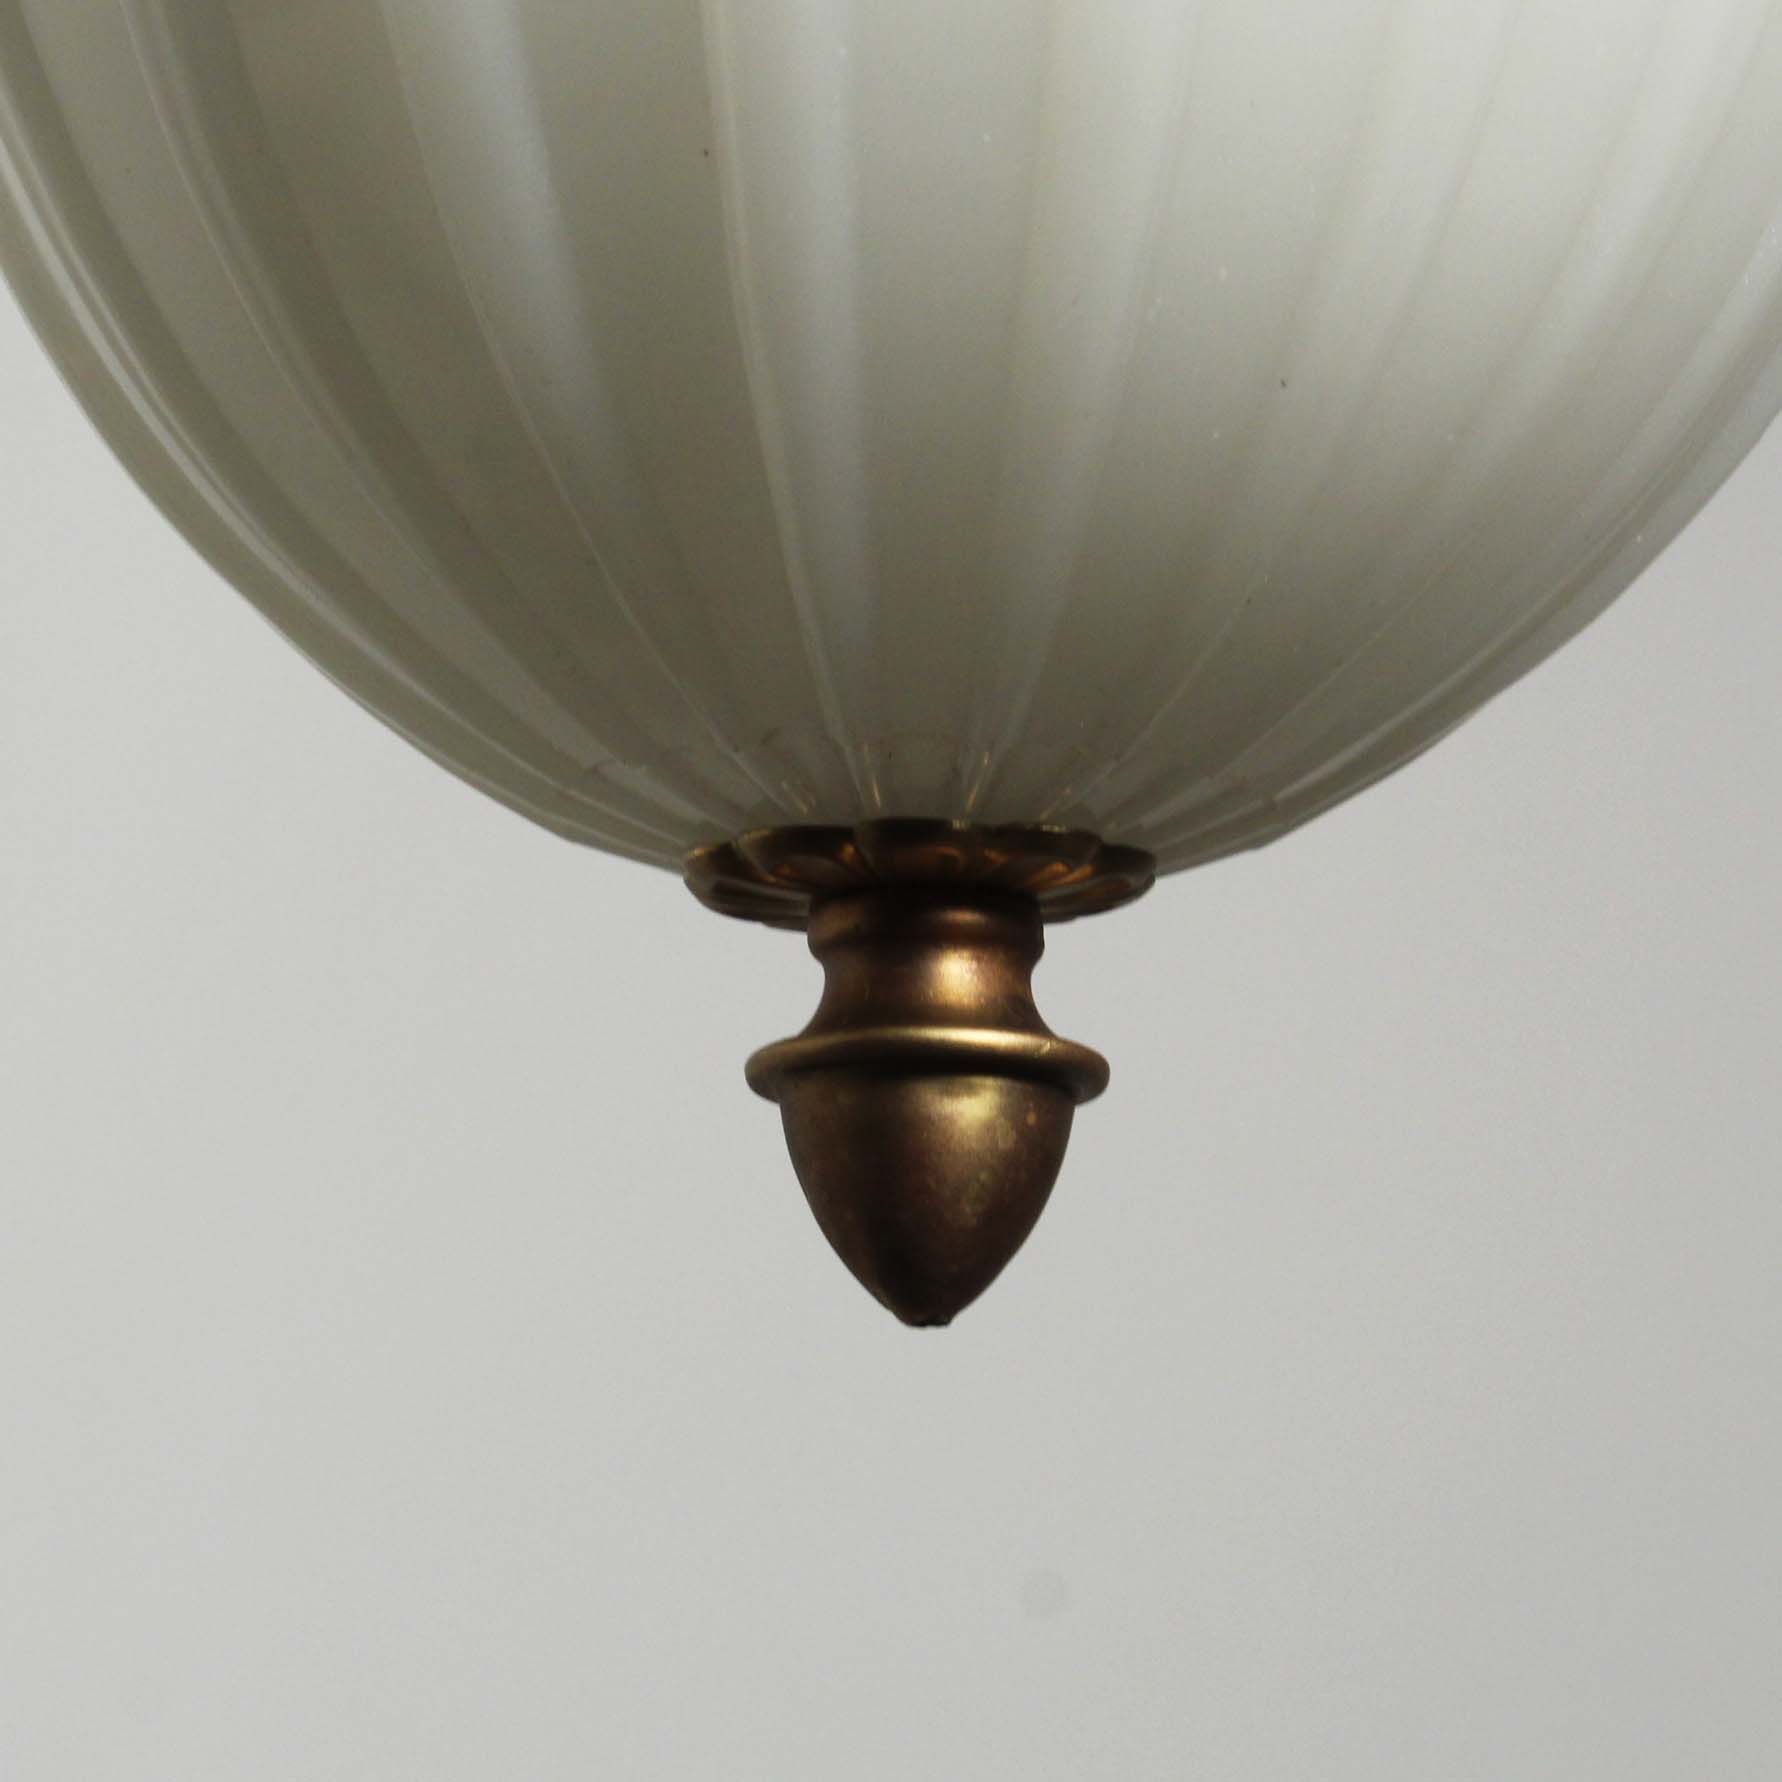 SOLD Inverted Dome Pendant Light, Antique Lighting-69112